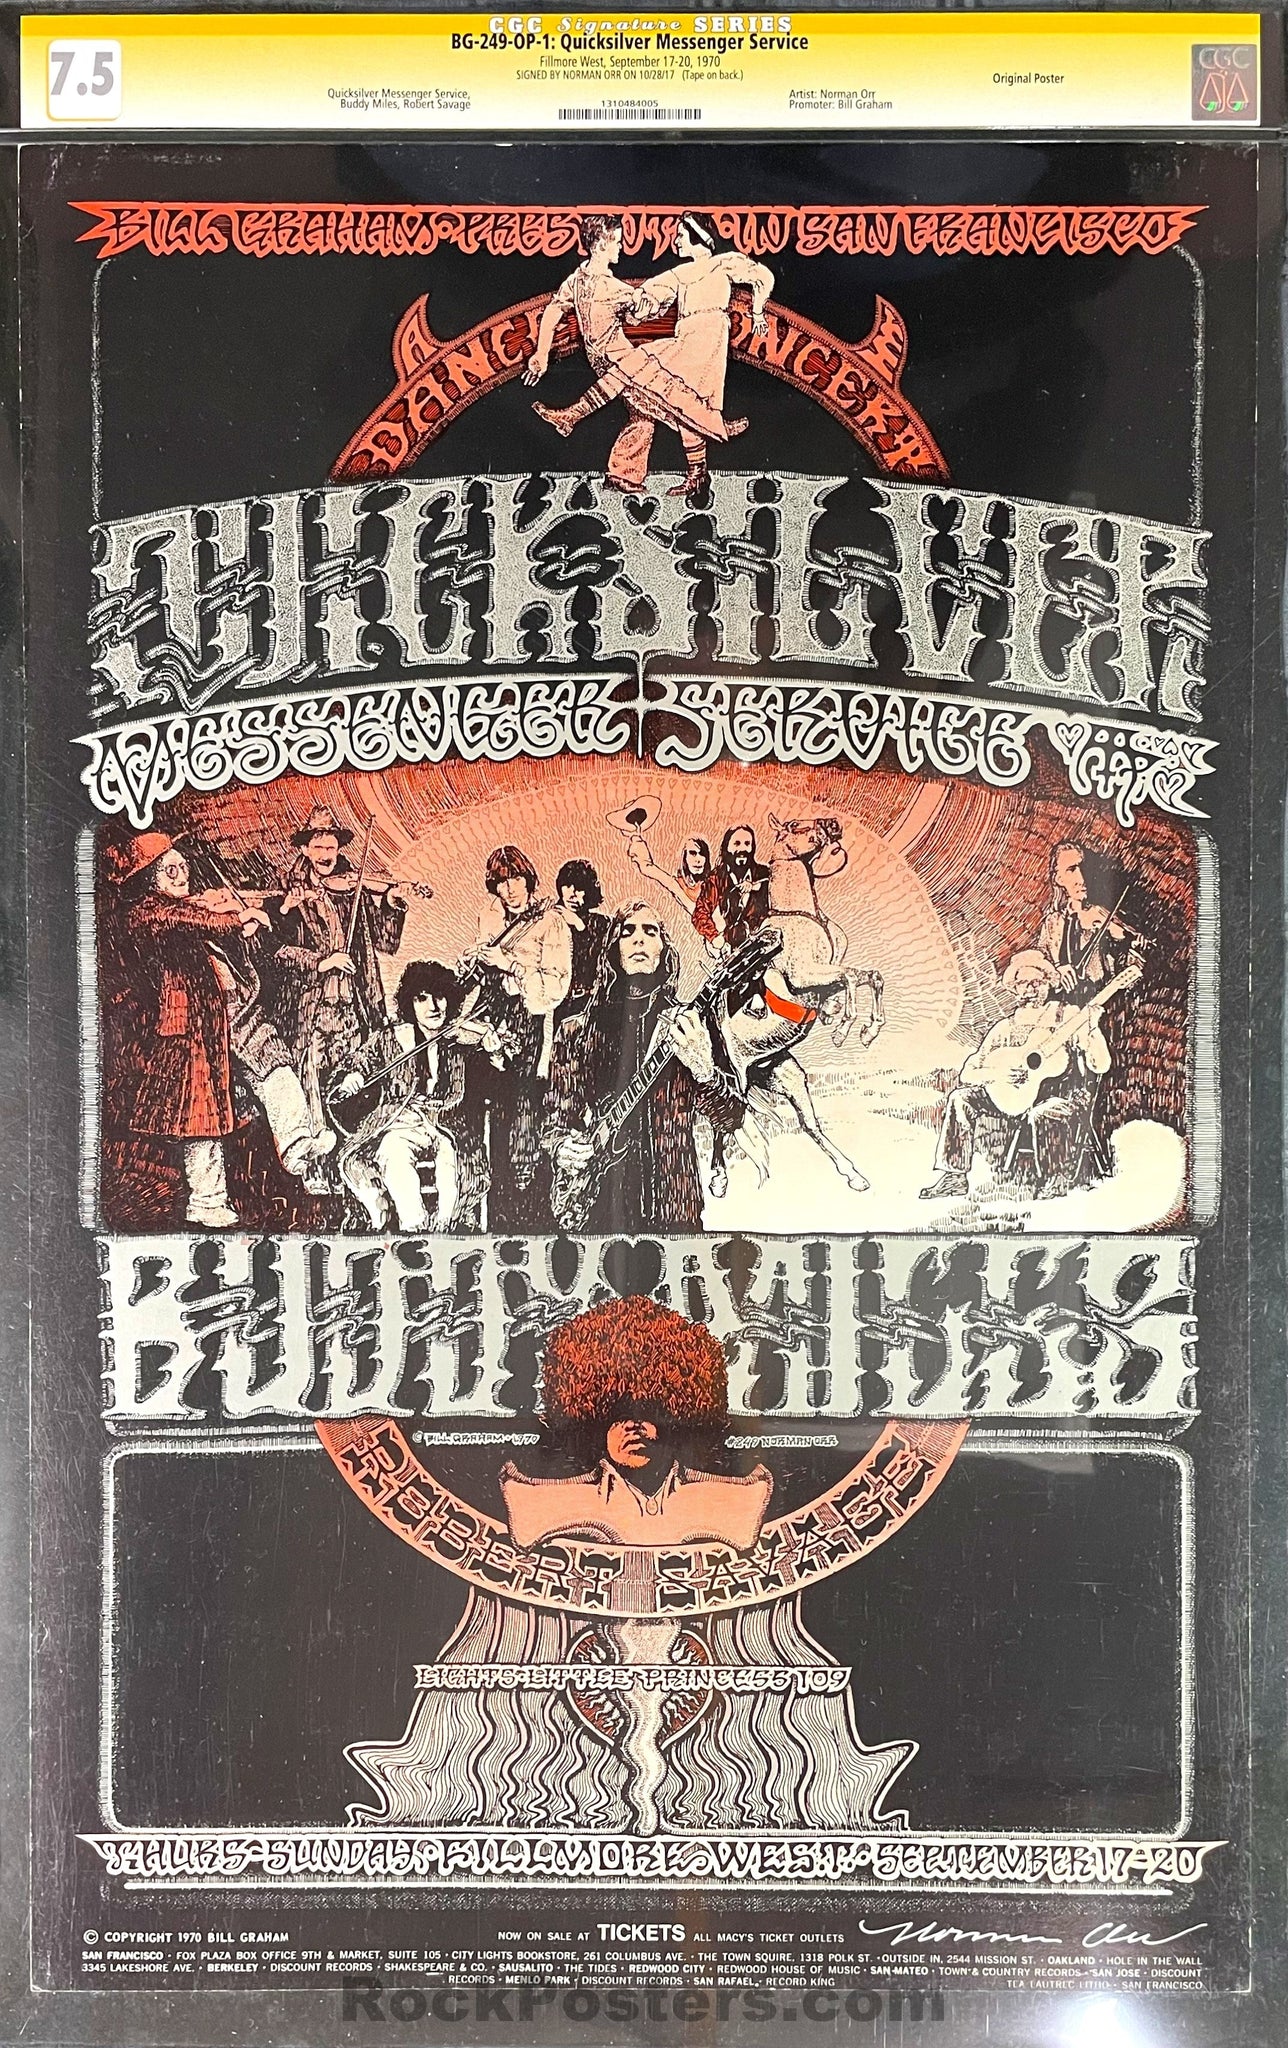 AUCTION - BG-249 - Quicksilver Messenger - Norman Orr Signed - 1970 Signed Poster - Fillmore West - CGC Graded 7.5